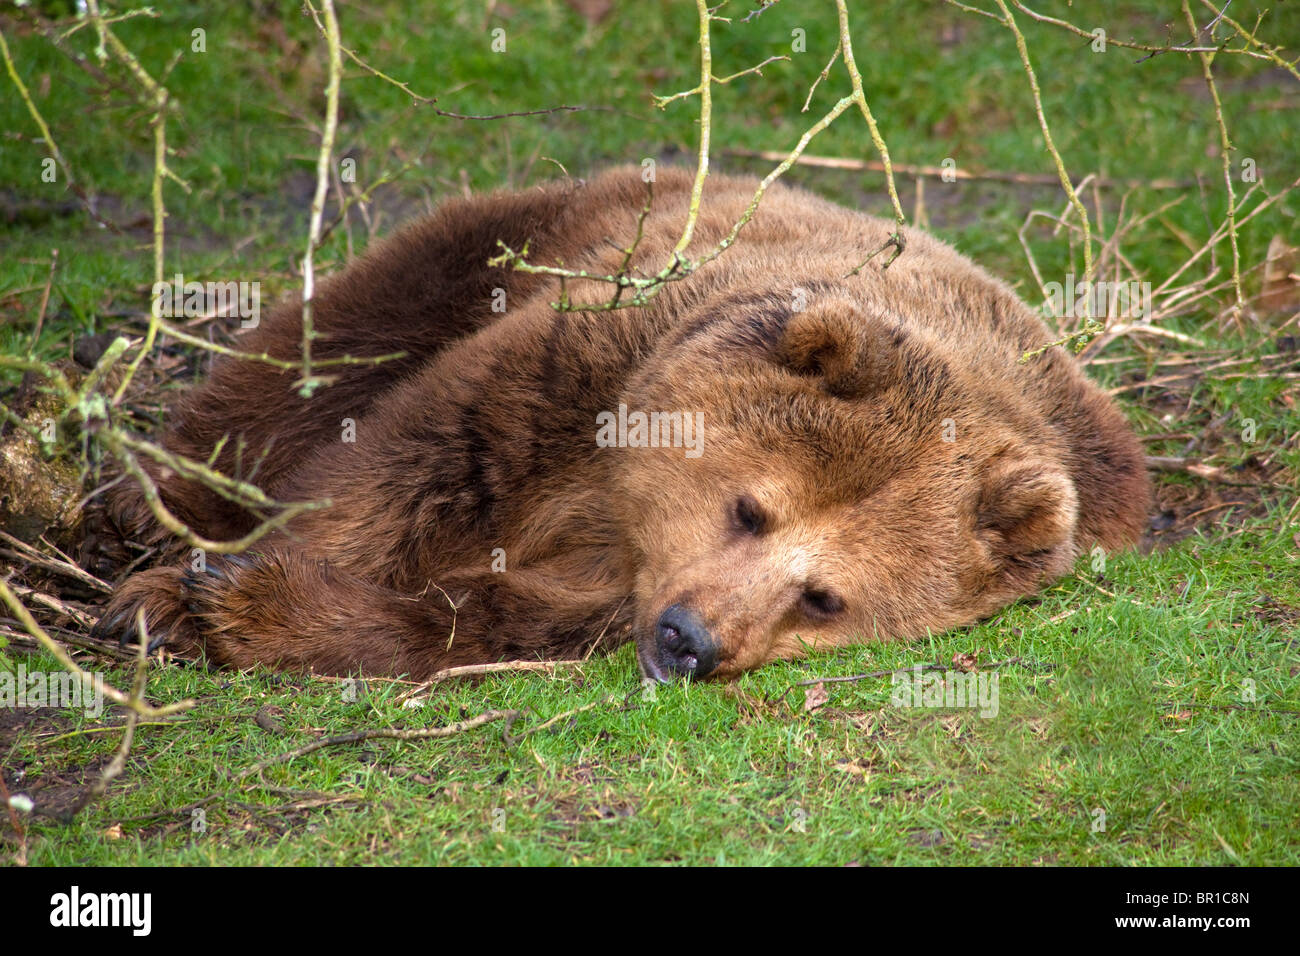 A Brown Bear sleeping in the shade Stock Photo